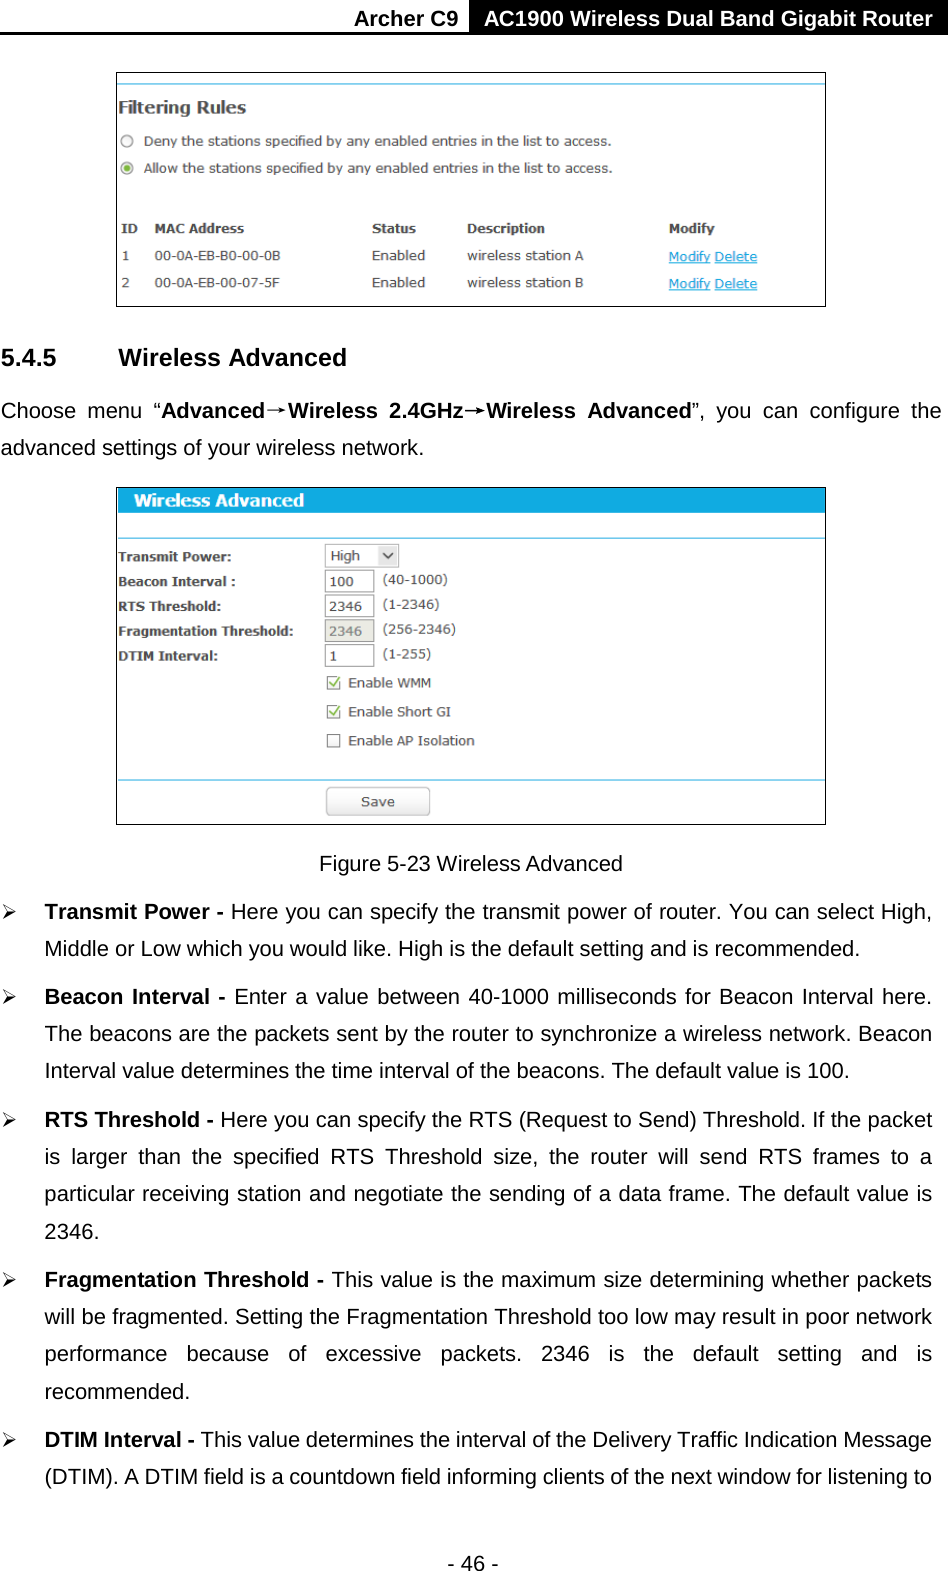 Archer C9 AC1900 Wireless Dual Band Gigabit Router   5.4.5 Wireless Advanced Choose menu “Advanced→Wireless 2.4GHz→Wireless  Advanced”, you can configure the advanced settings of your wireless network.  Figure 5-23 Wireless Advanced  Transmit Power - Here you can specify the transmit power of router. You can select High, Middle or Low which you would like. High is the default setting and is recommended.  Beacon Interval - Enter a value between 40-1000 milliseconds for Beacon Interval here. The beacons are the packets sent by the router to synchronize a wireless network. Beacon Interval value determines the time interval of the beacons. The default value is 100.    RTS Threshold - Here you can specify the RTS (Request to Send) Threshold. If the packet is larger than the specified RTS Threshold size, the router  will send RTS frames to a particular receiving station and negotiate the sending of a data frame. The default value is 2346.    Fragmentation Threshold - This value is the maximum size determining whether packets will be fragmented. Setting the Fragmentation Threshold too low may result in poor network performance because of excessive packets. 2346 is the default setting and is recommended.    DTIM Interval - This value determines the interval of the Delivery Traffic Indication Message (DTIM). A DTIM field is a countdown field informing clients of the next window for listening to - 46 - 